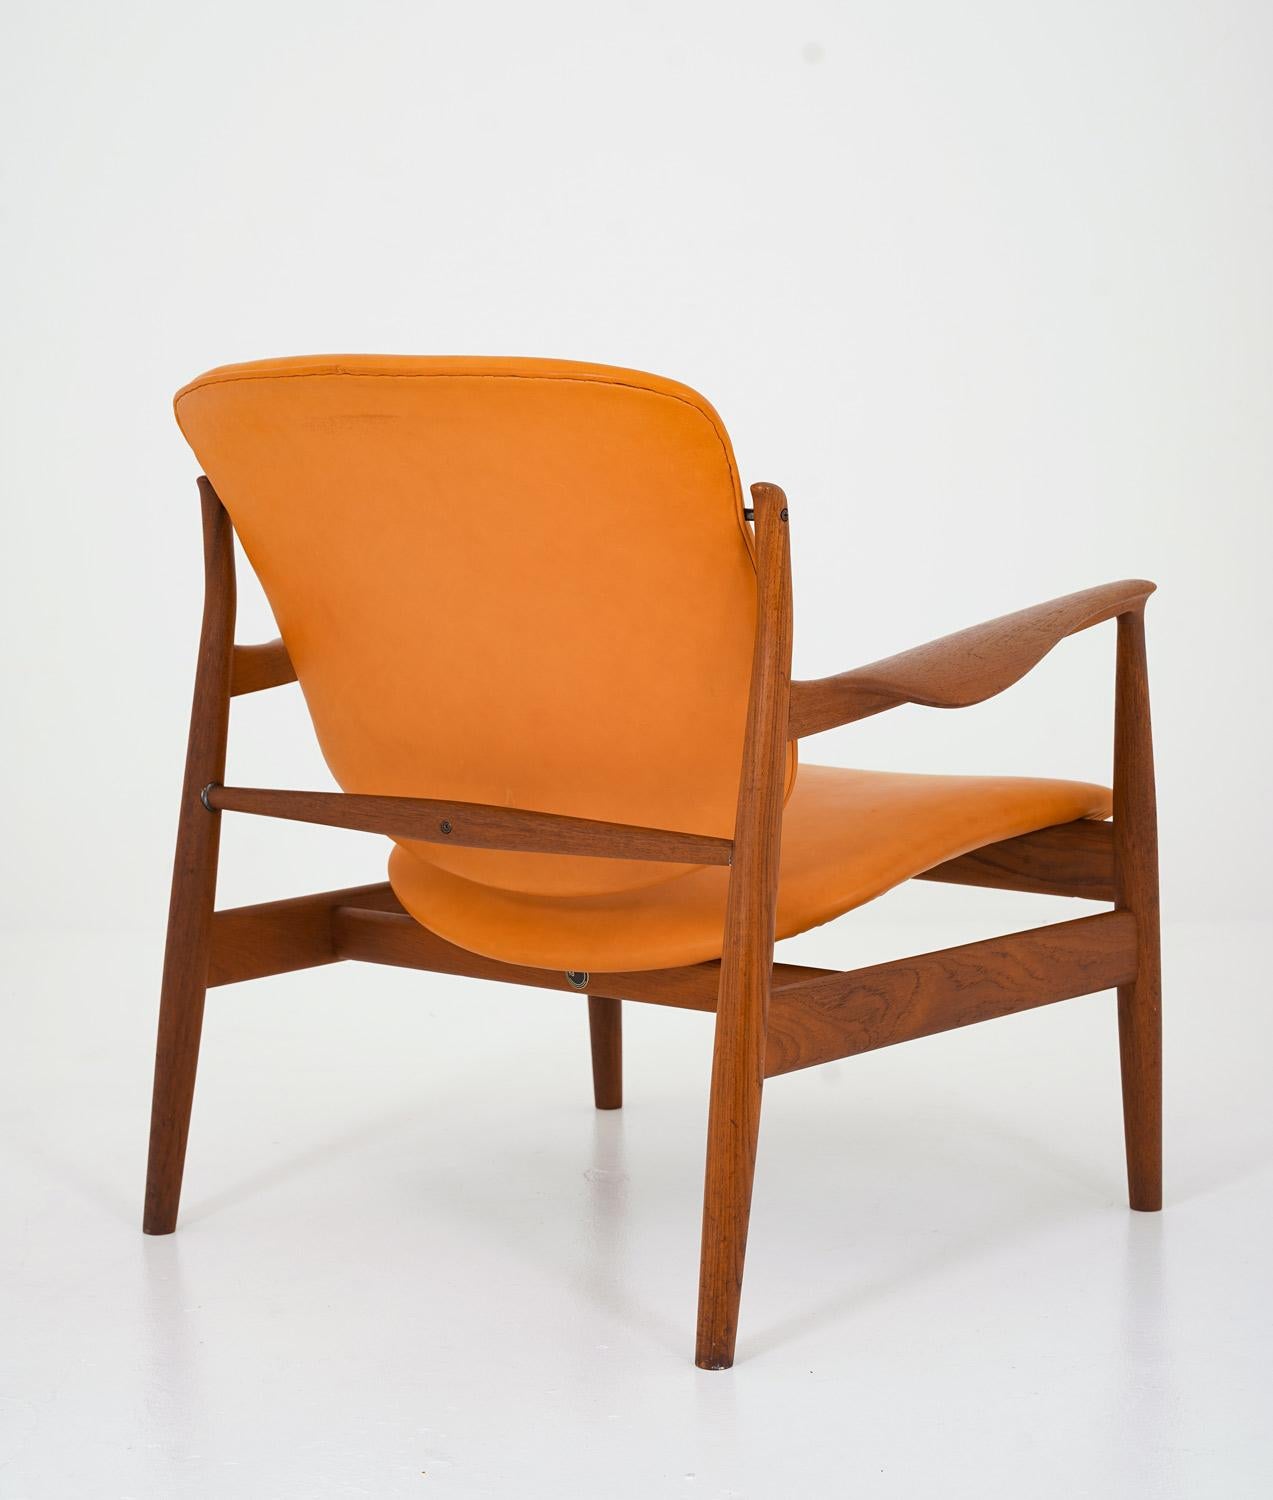 Finn Juhl Cognac Leather and Teak Lounge Chair model FD 136 In Good Condition For Sale In Karlstad, SE